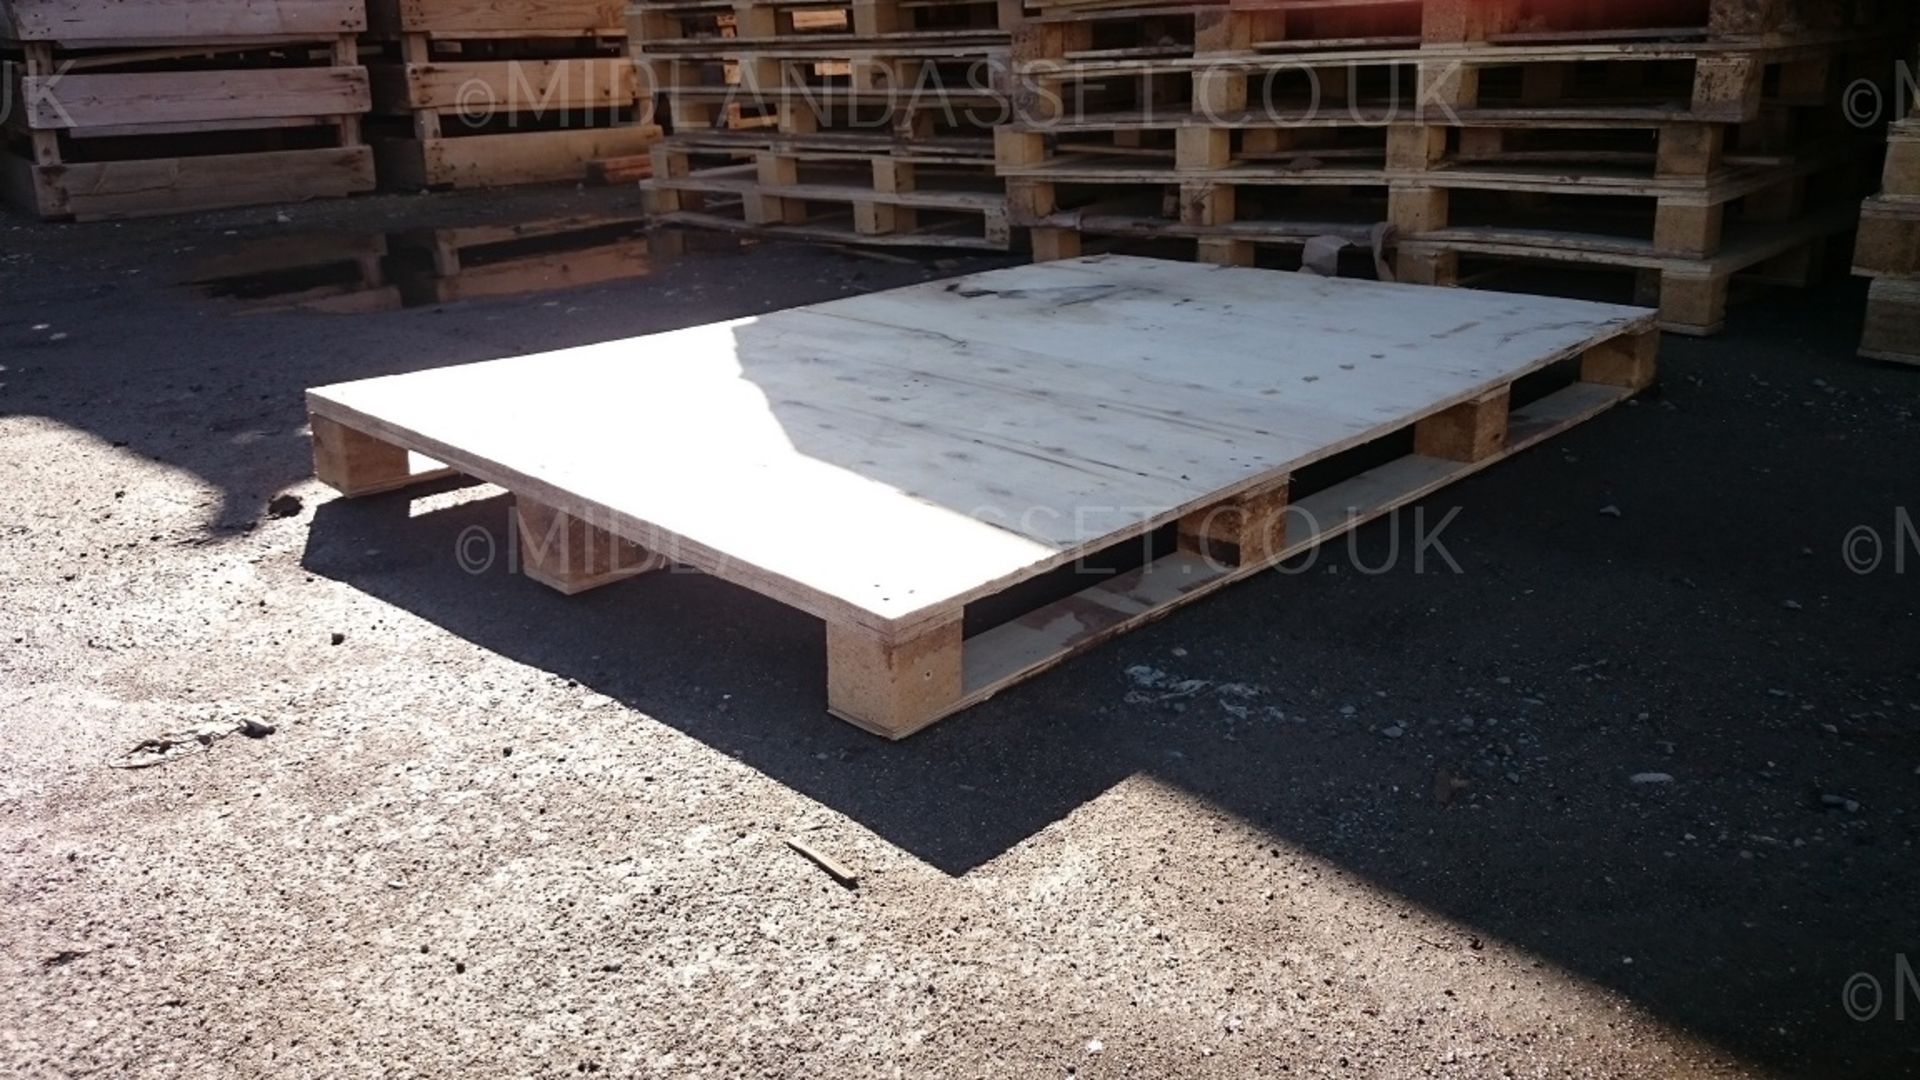 PLY TOP PALLETS - 400 IN TOTAL! - Image 2 of 3